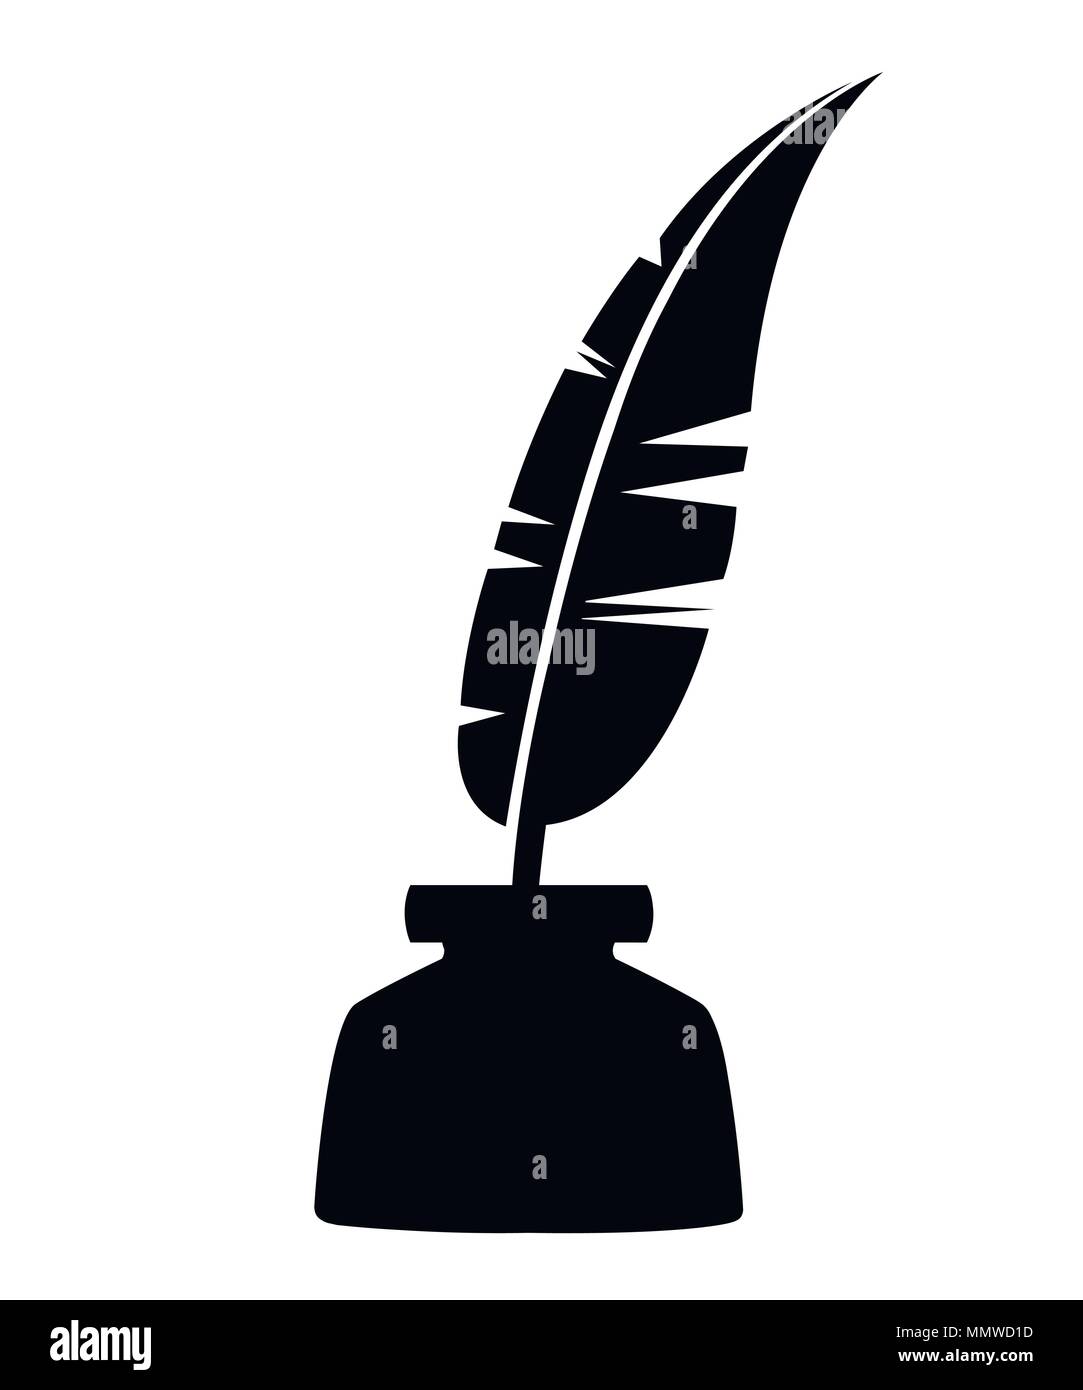 Black silhouette. Quill and Inkwell color icon. Black writing feather. Pen symbol illustration. Vector illustration isolated on white background. Stock Vector